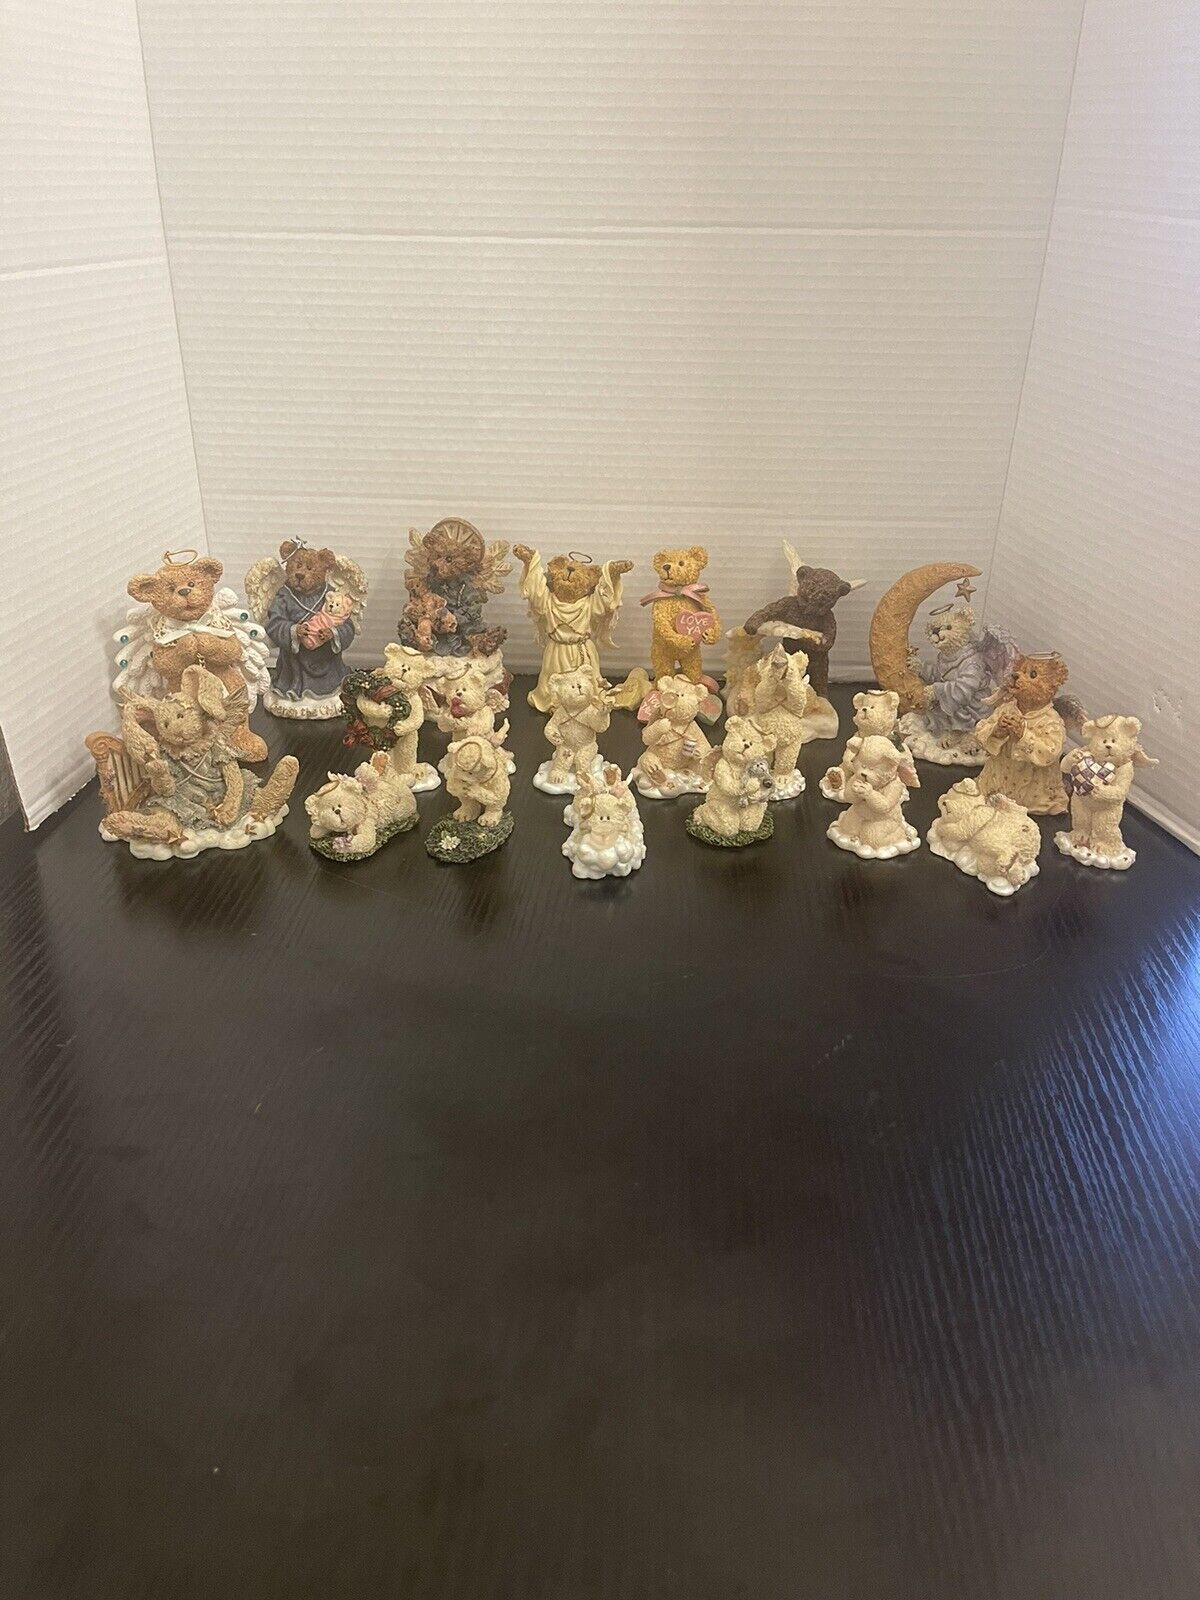 BOYD'S BEARS FIGURINES COLLECTION ALL VINTAGE LOT OF 20 ANGELIC THEME